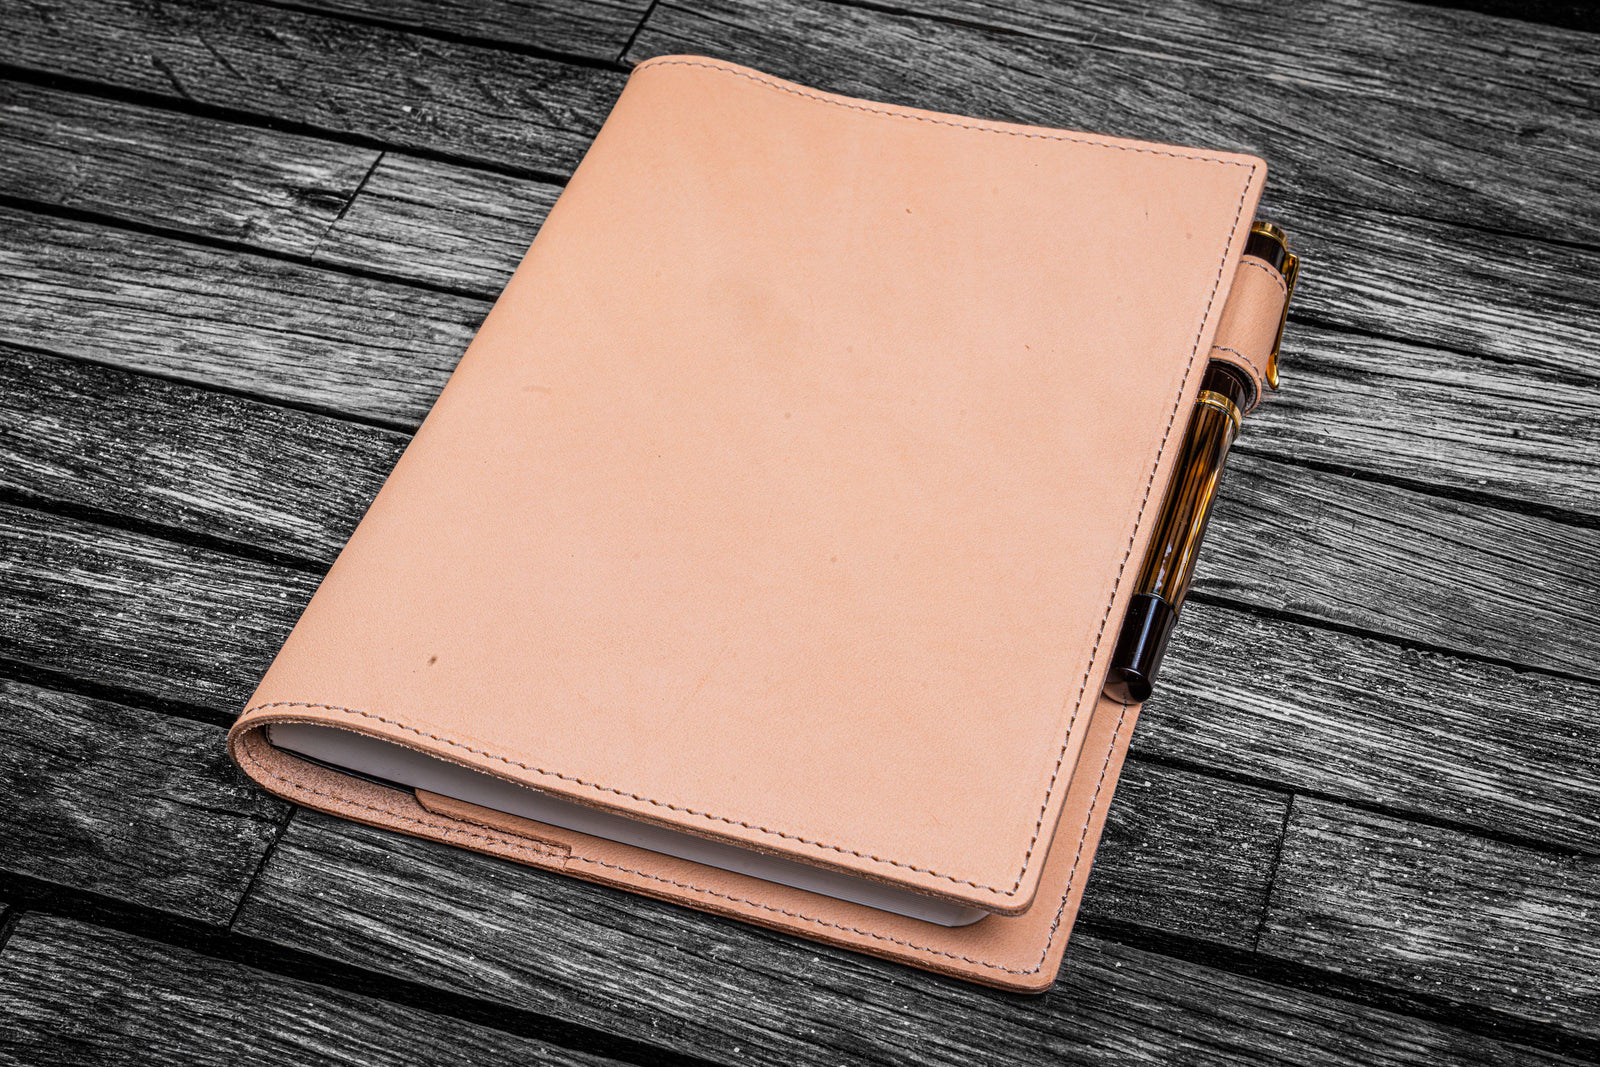 Leather Cover for A6/A5 Sized Soft Cover Notebooks Fits 